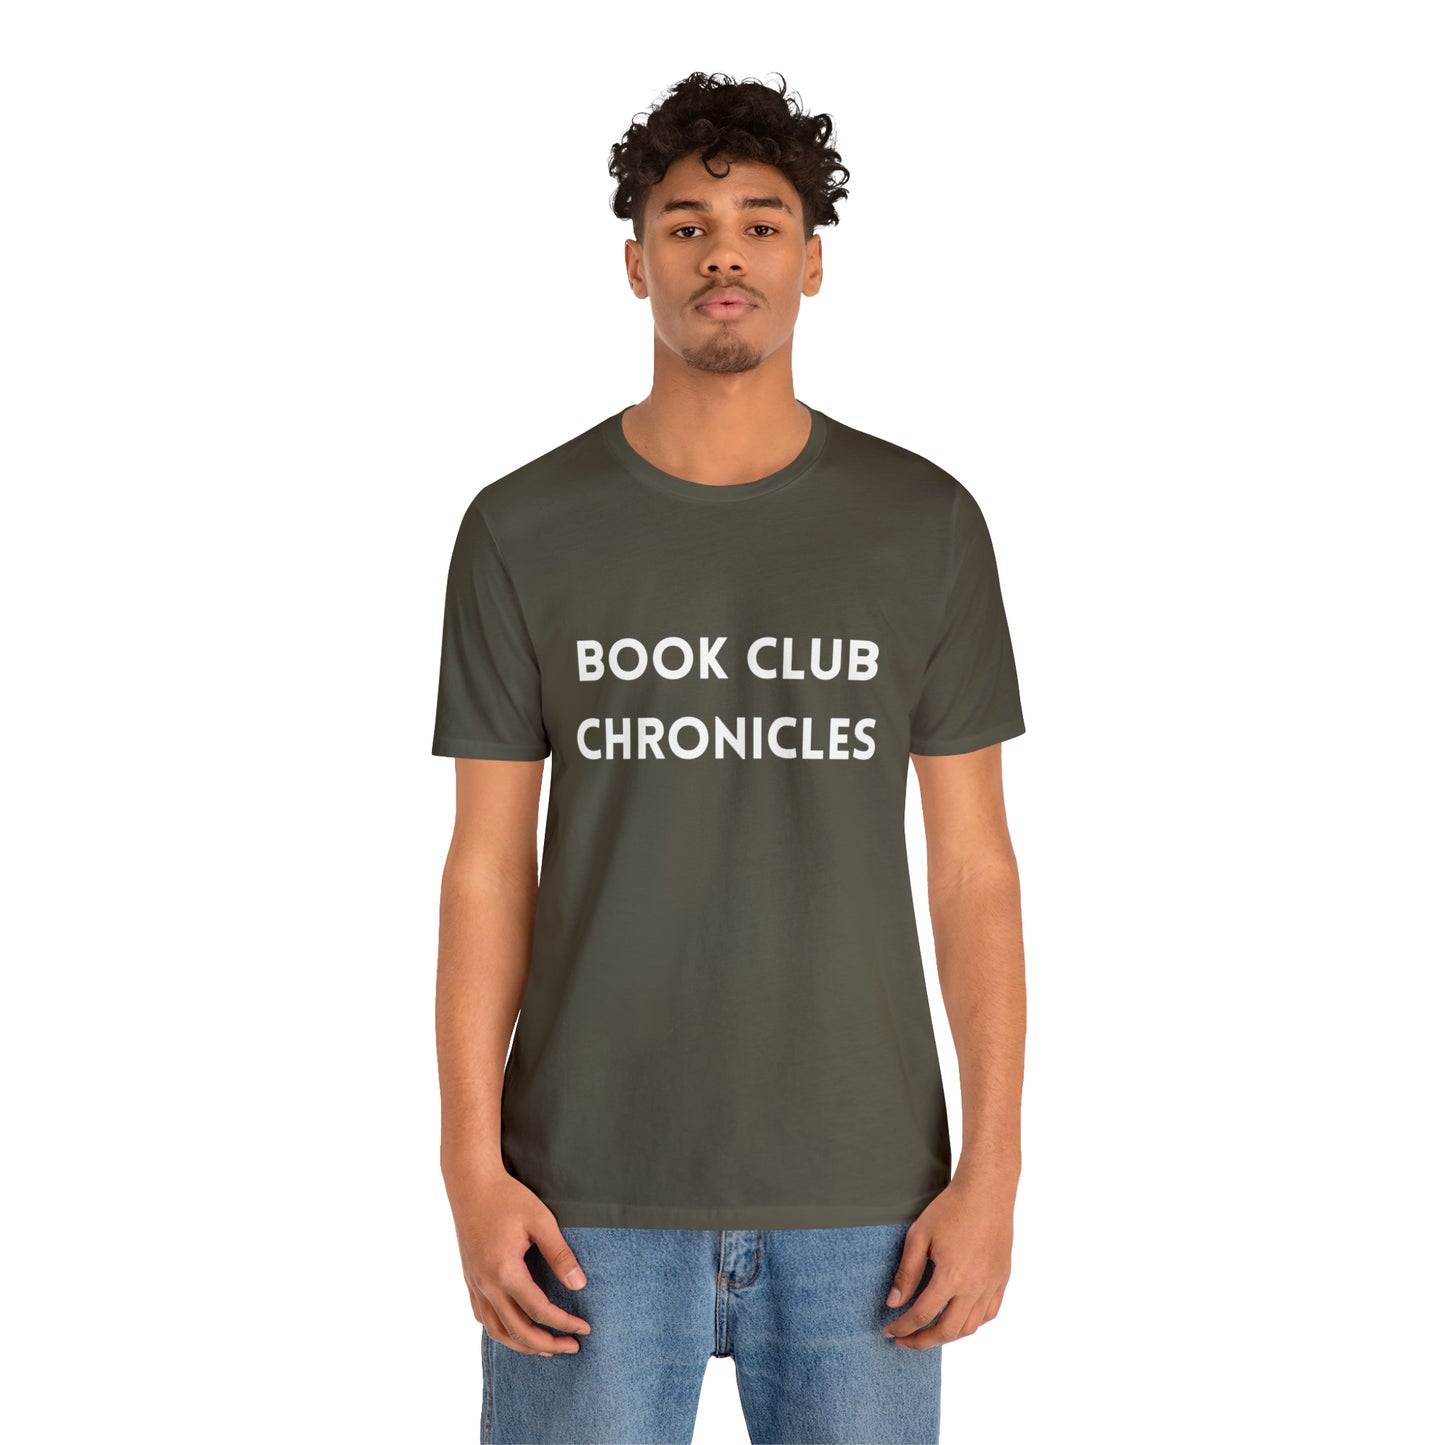 Bookworm Chic: 'Book Club Chronicles' T-Shirt for Avid Readers Army T-Shirt Petrova Designs